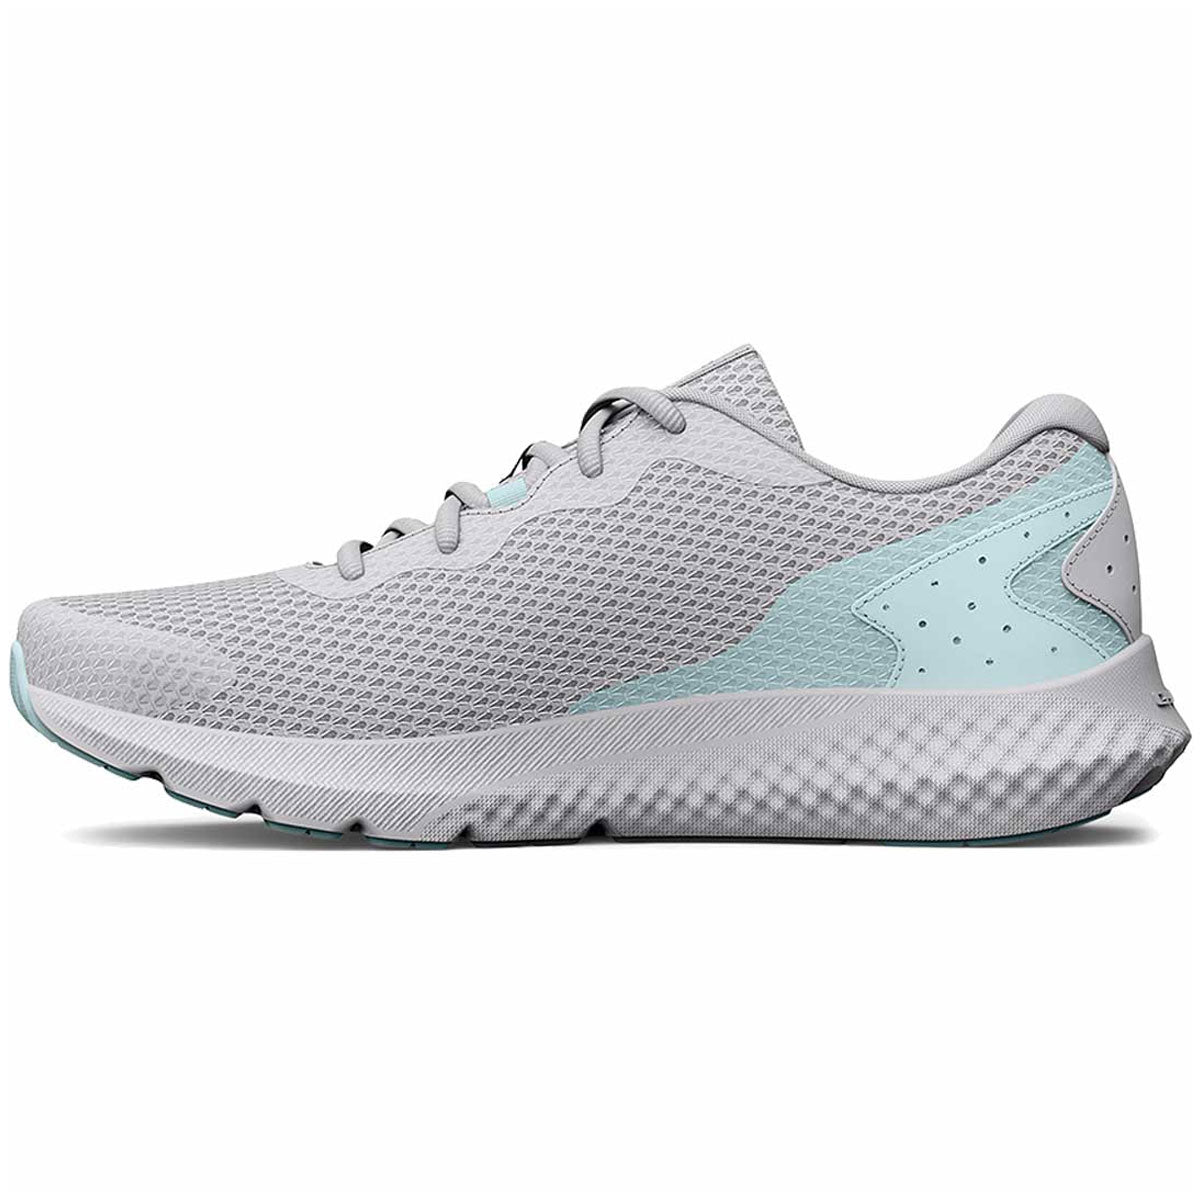 Under Armour Charged Rogue 3 Womens Running Shoes